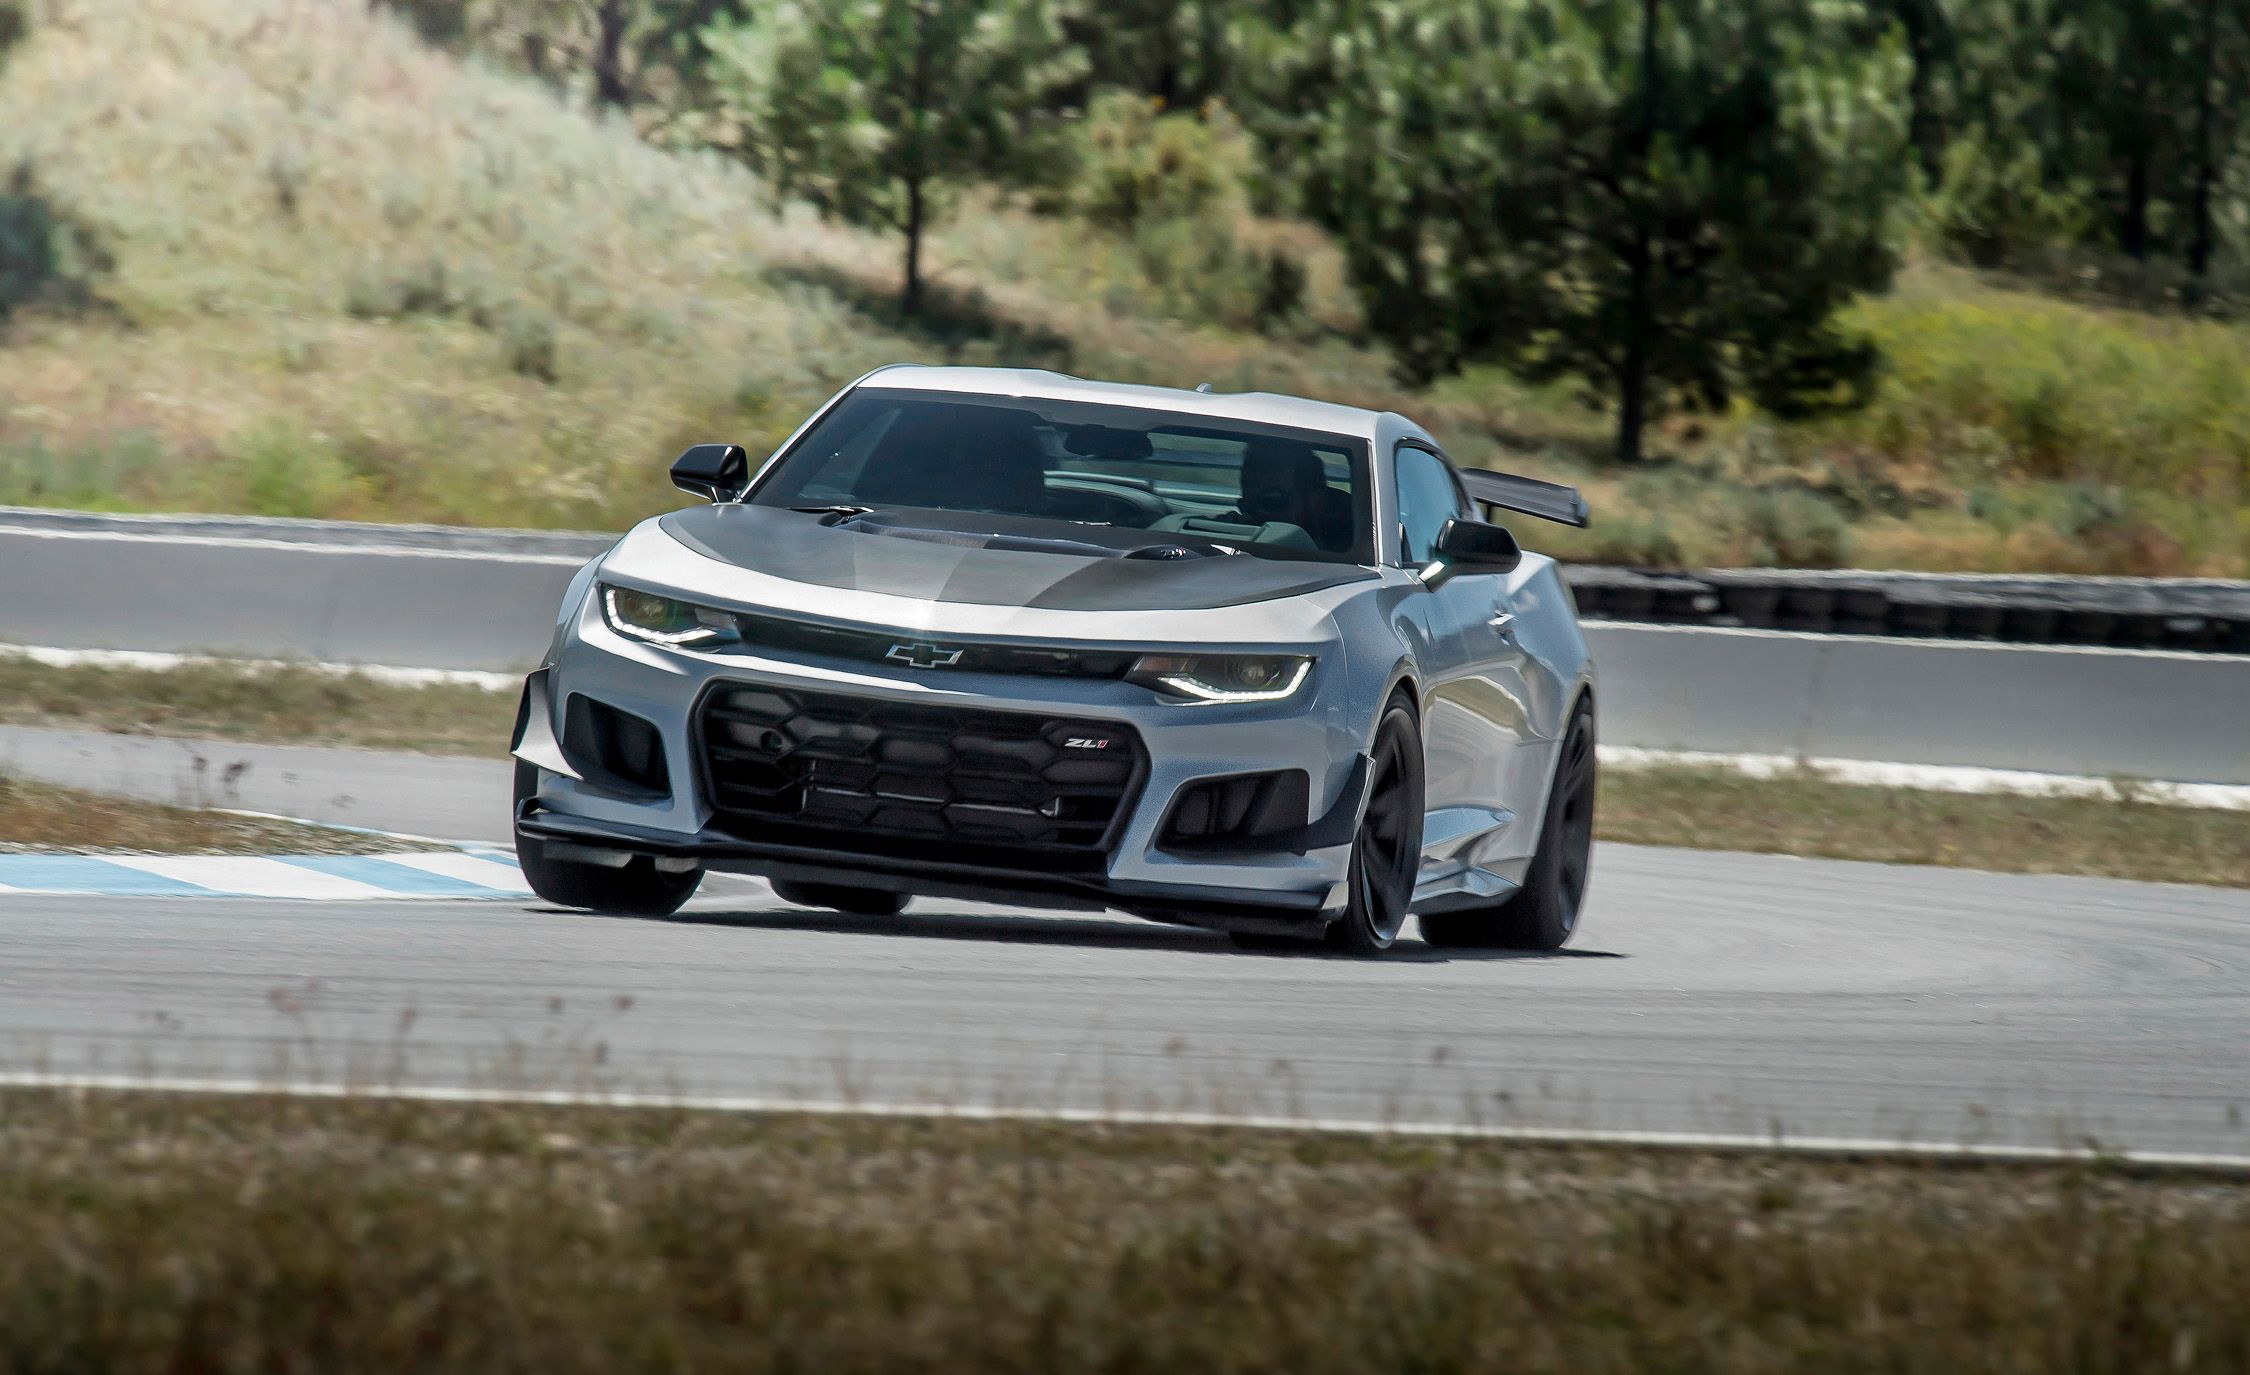 2018 Chevrolet Camaro Zl1 Review, Pricing, And Specs